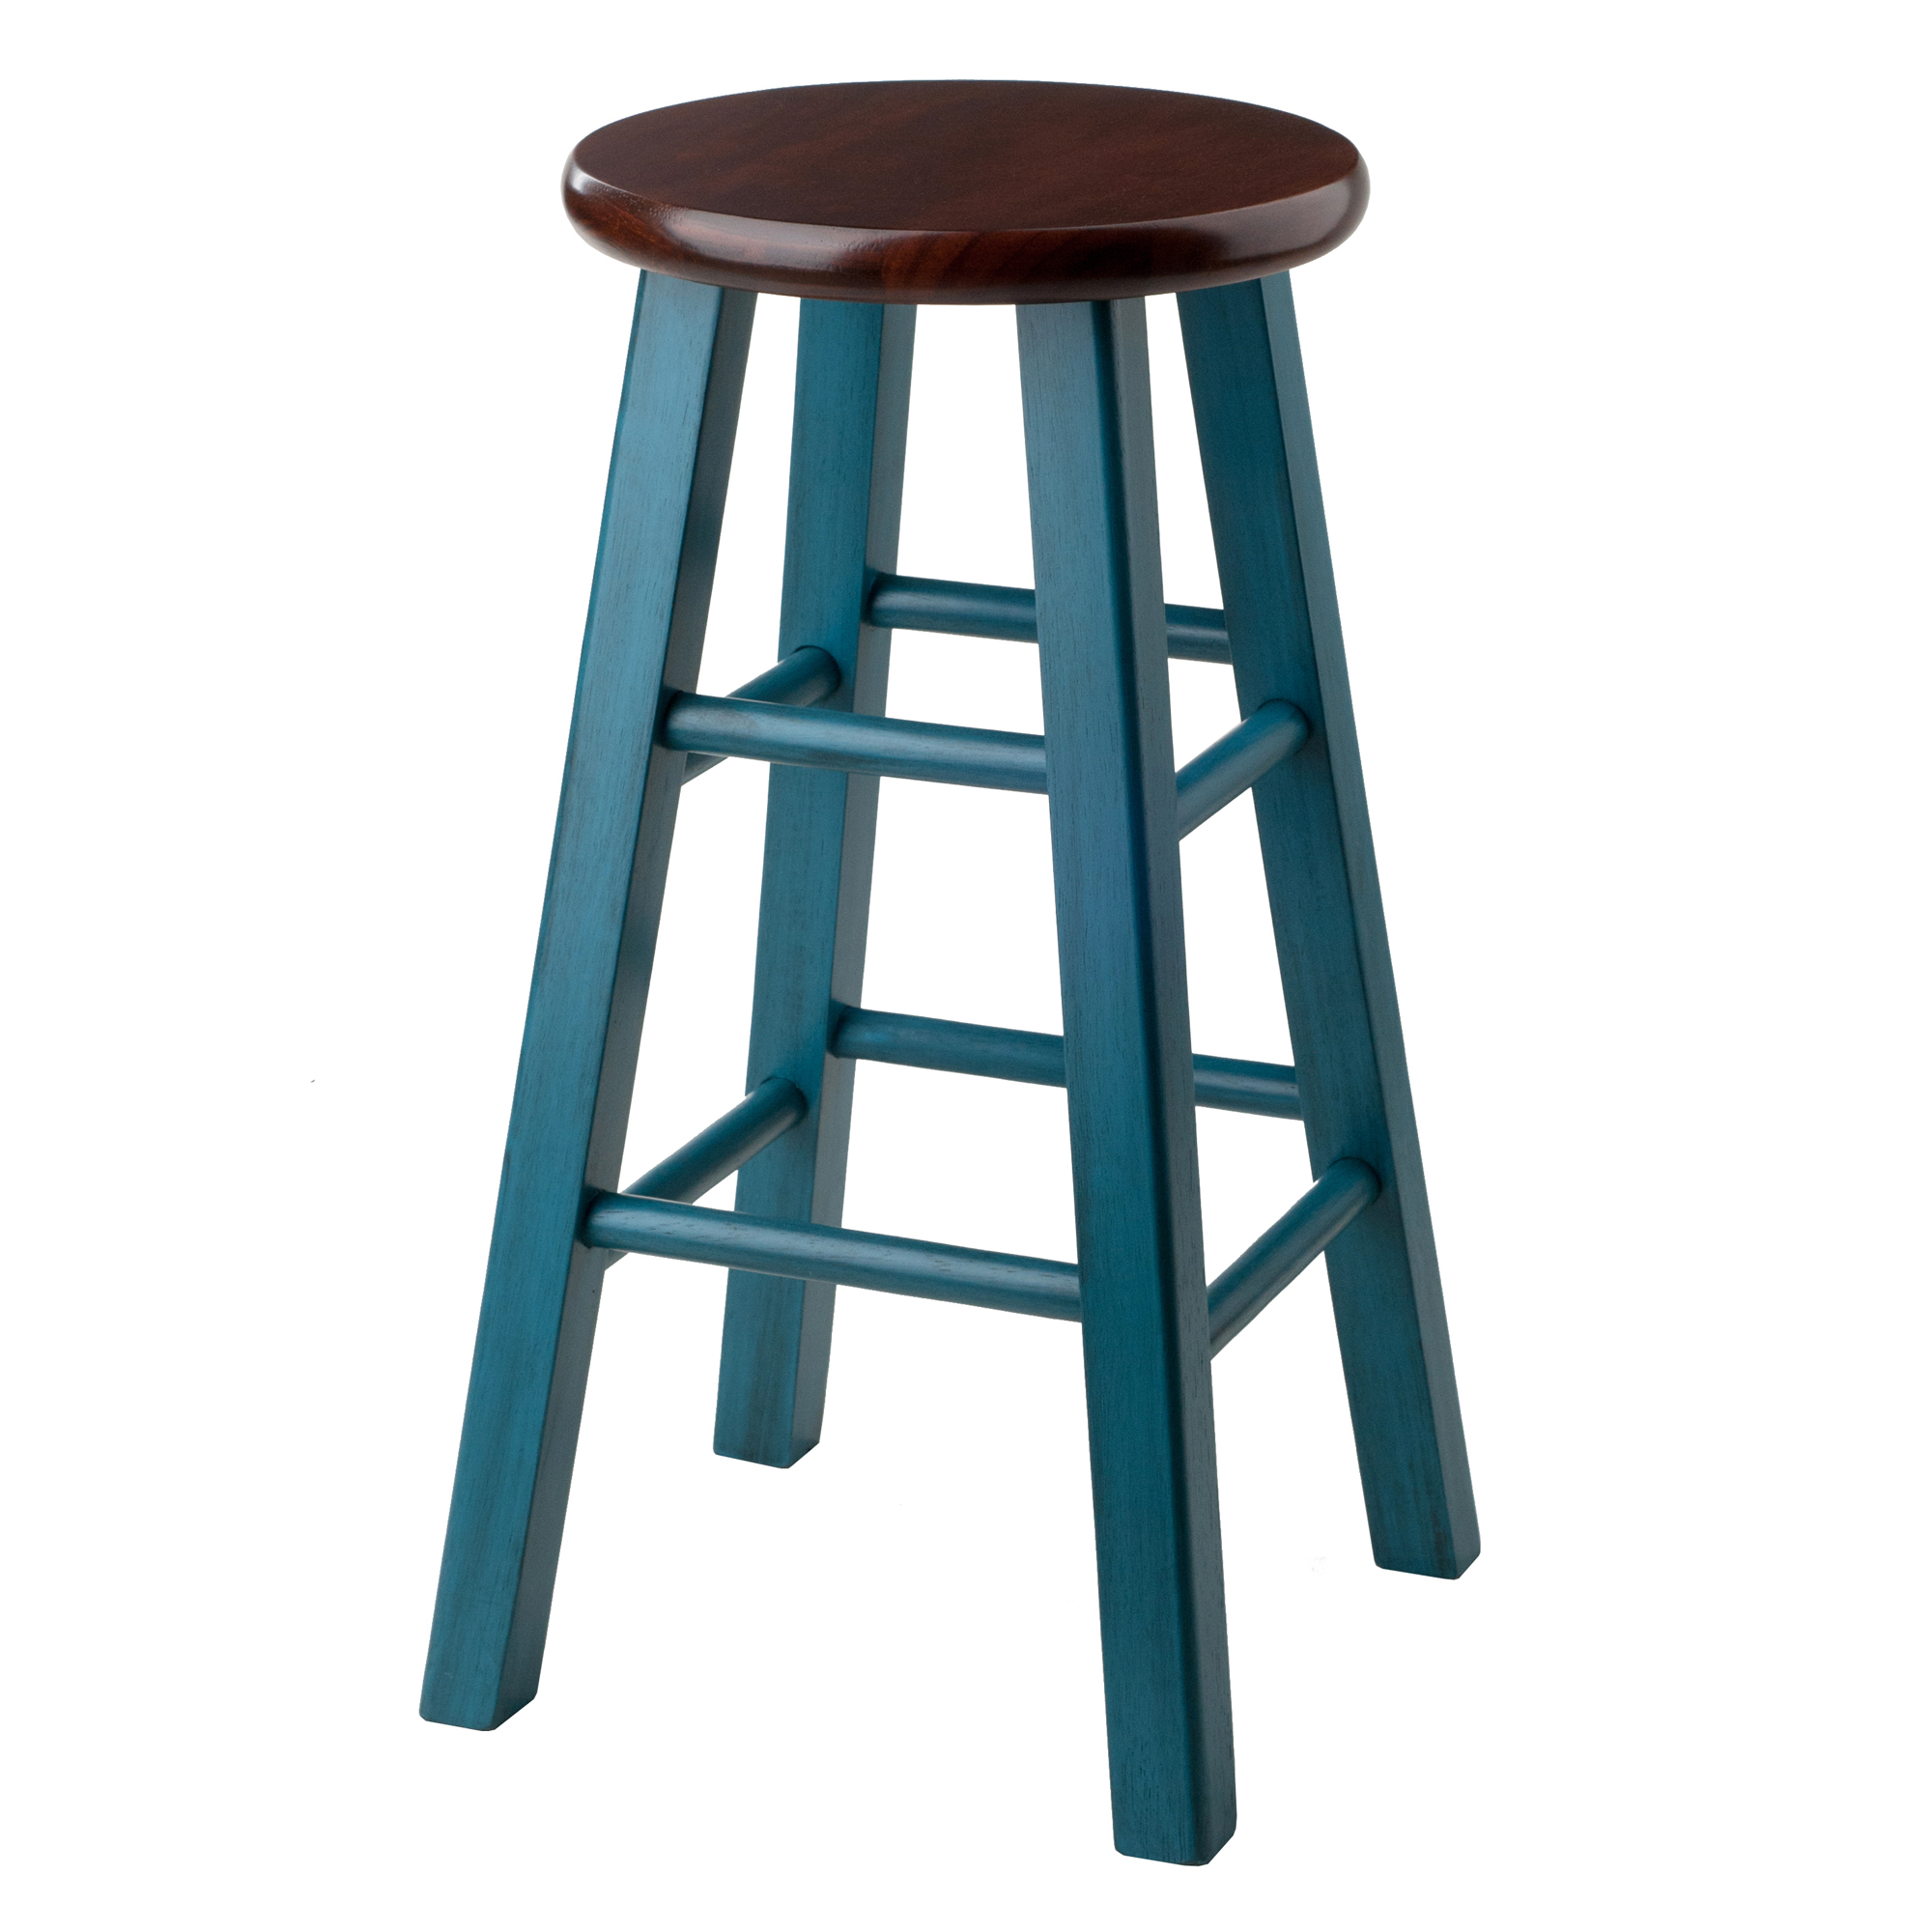 Winsome Wood Ivy 24" Counter Stool, Rustic Teal & Walnut Finish - image 1 of 6